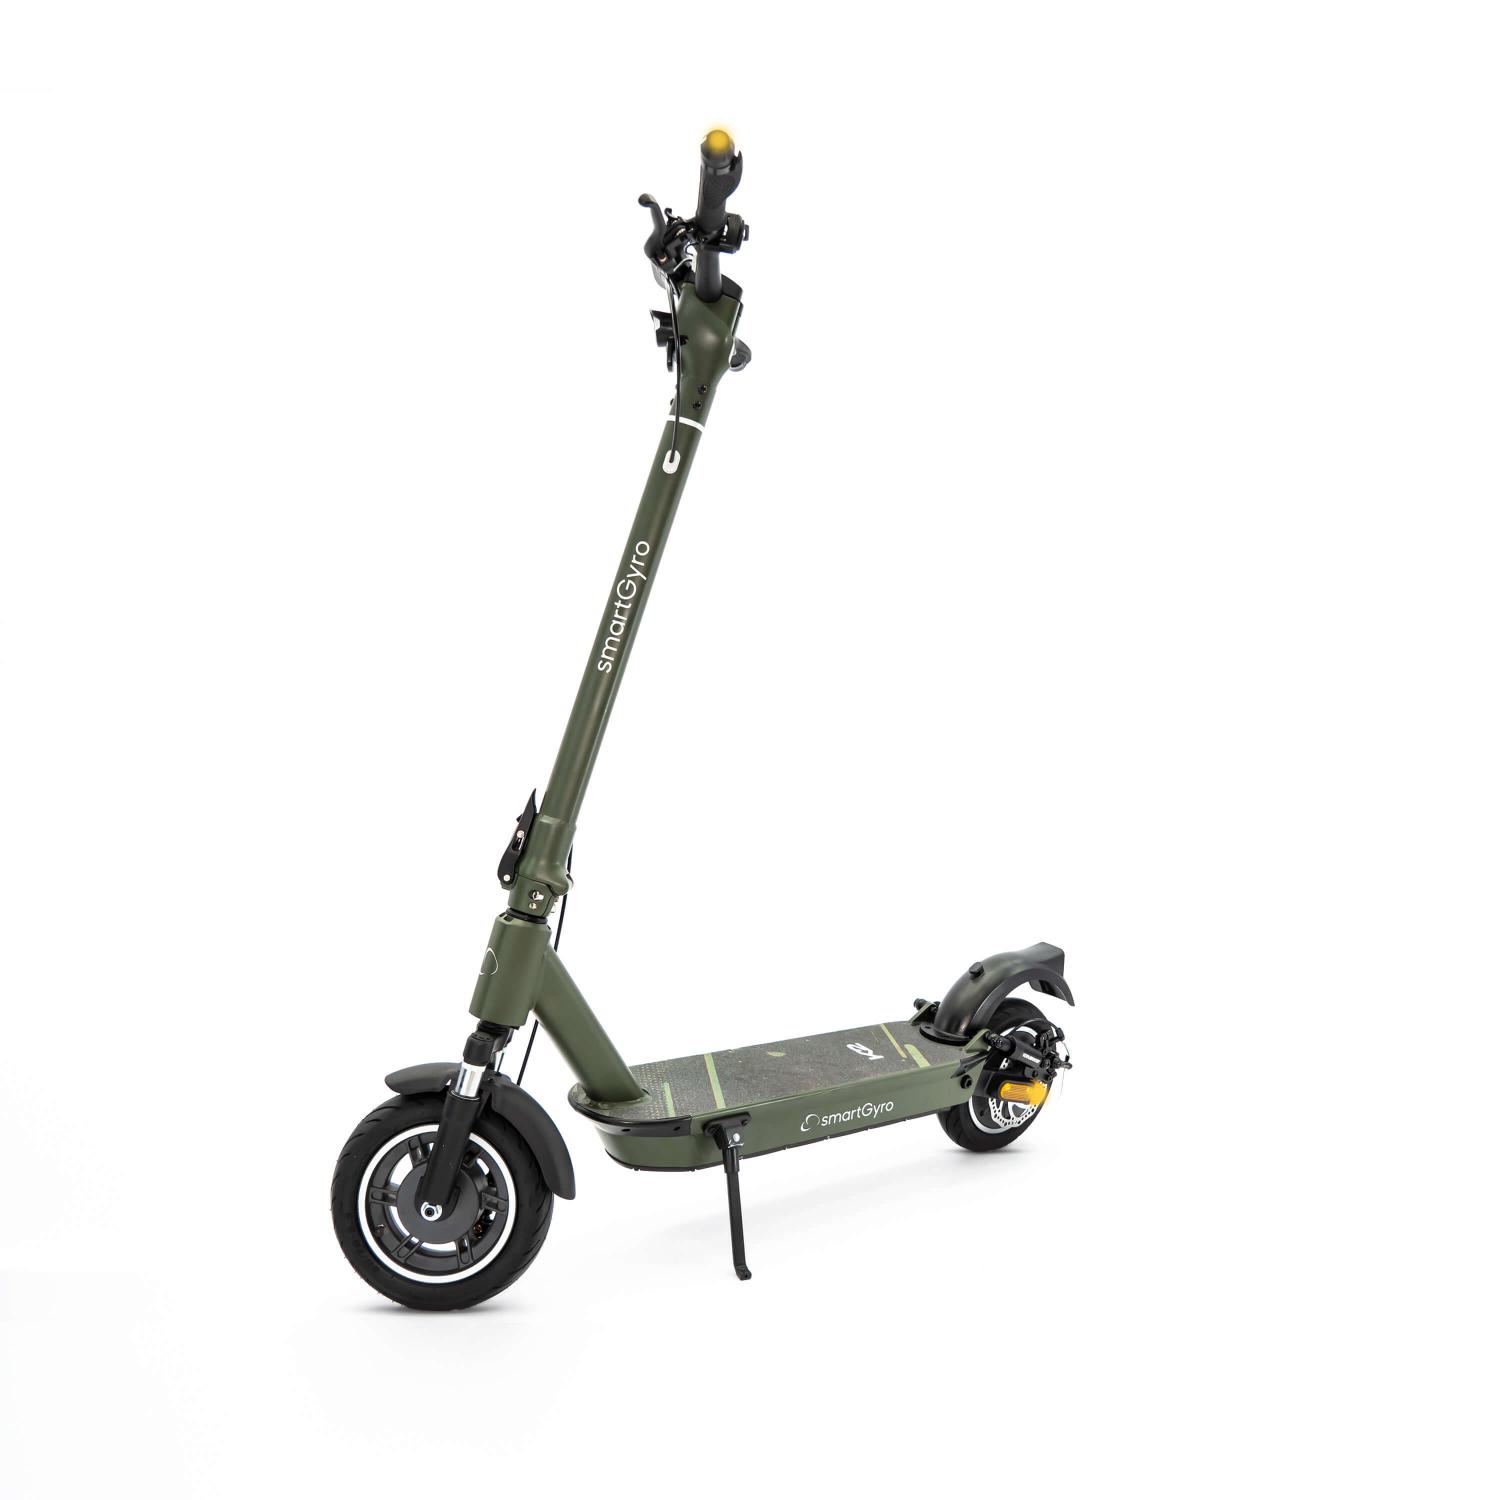 https://bgoelectric.com/wp-content/uploads/2022/10/patinete-electrico-smartgyro-k2-army-1.jpg